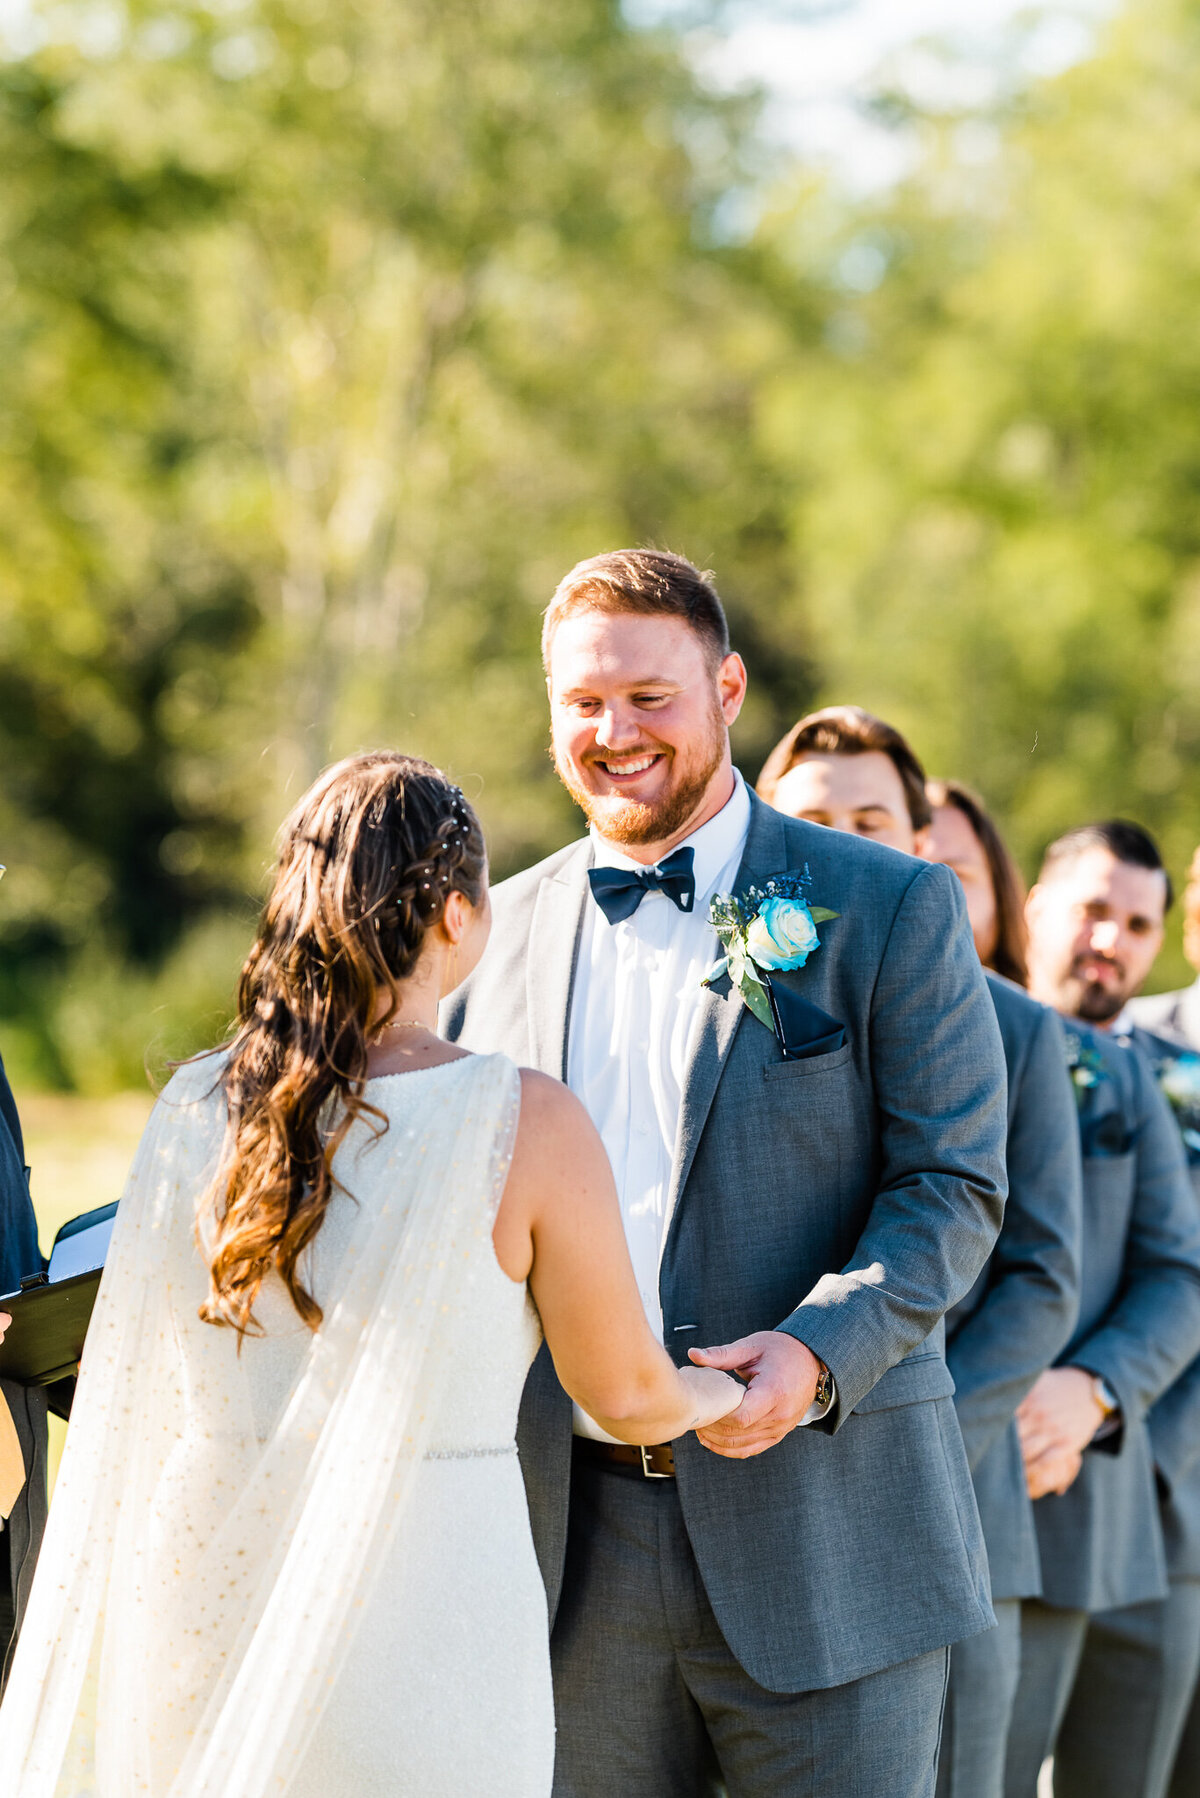 outdoor wedding ceremony in Virginia with groom holding his brides hands and smiling at her while the sun sets over them at Shenandoah wedding venue